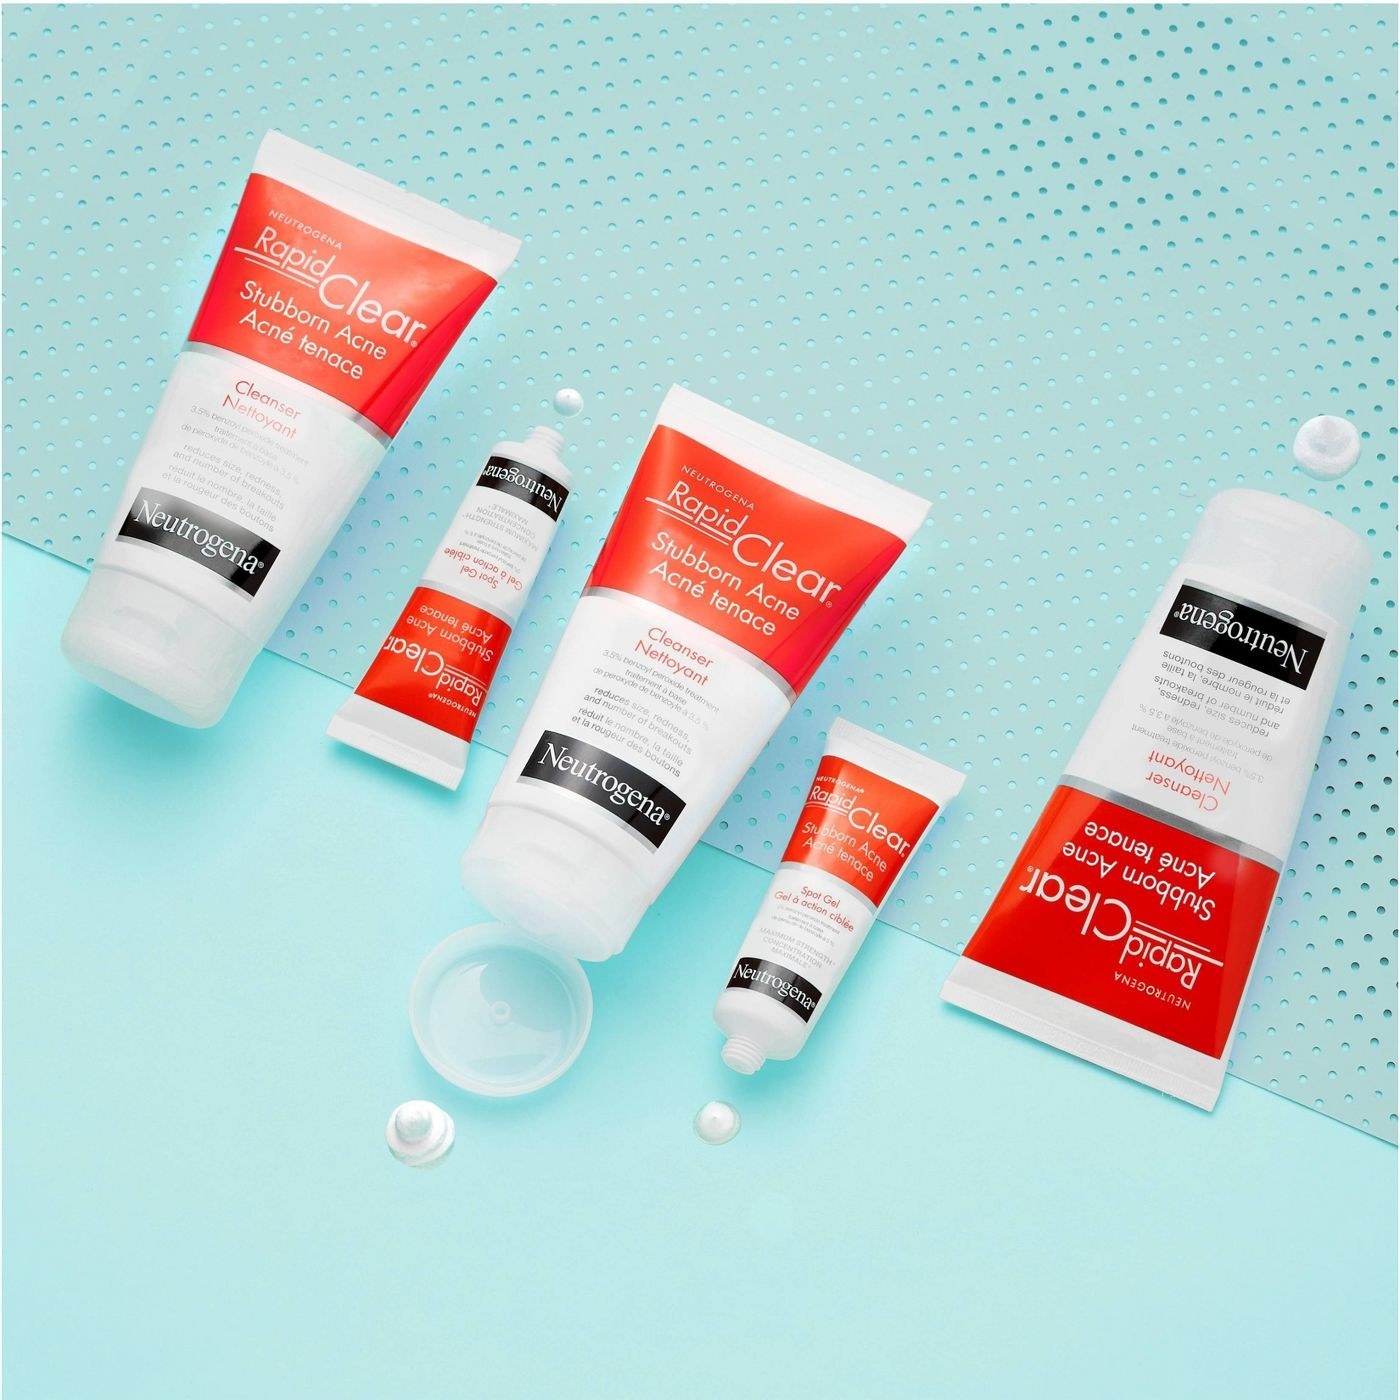 Five bottles in varying sizes of facial acne cleanser